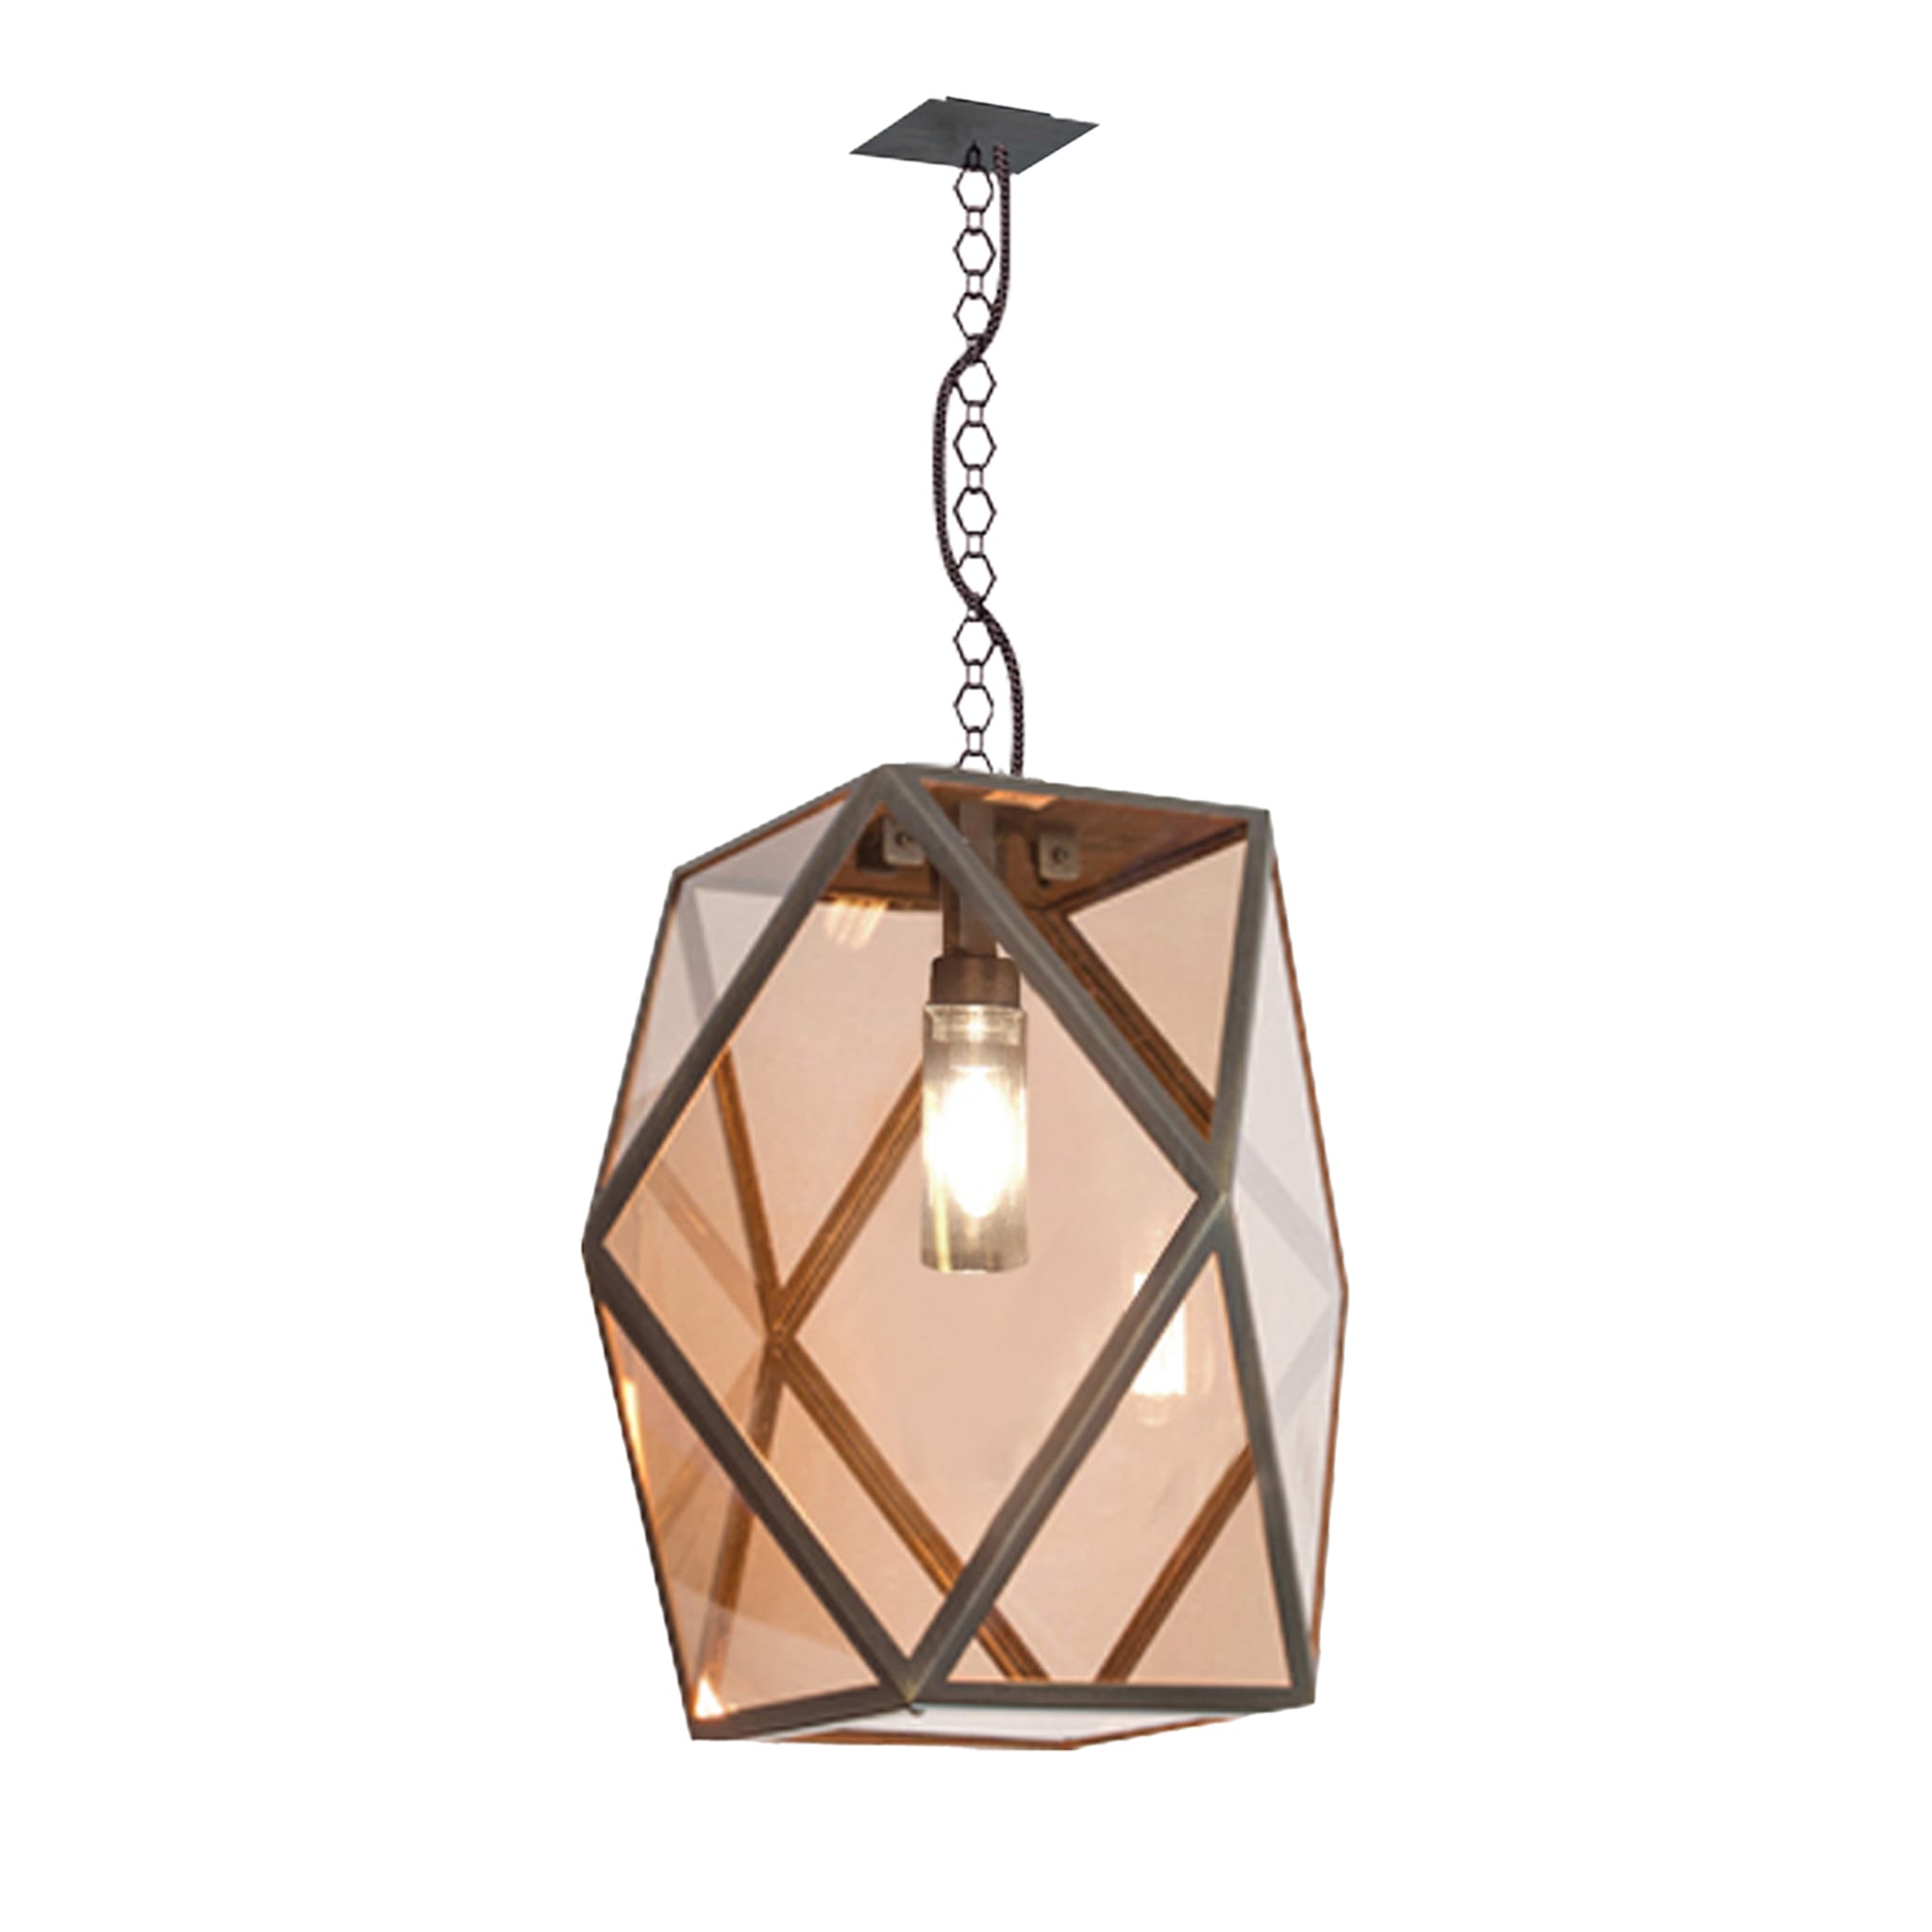 Muse Lantern Large SO Outdoor Suspension Lamp by Tristan Auer - Main view